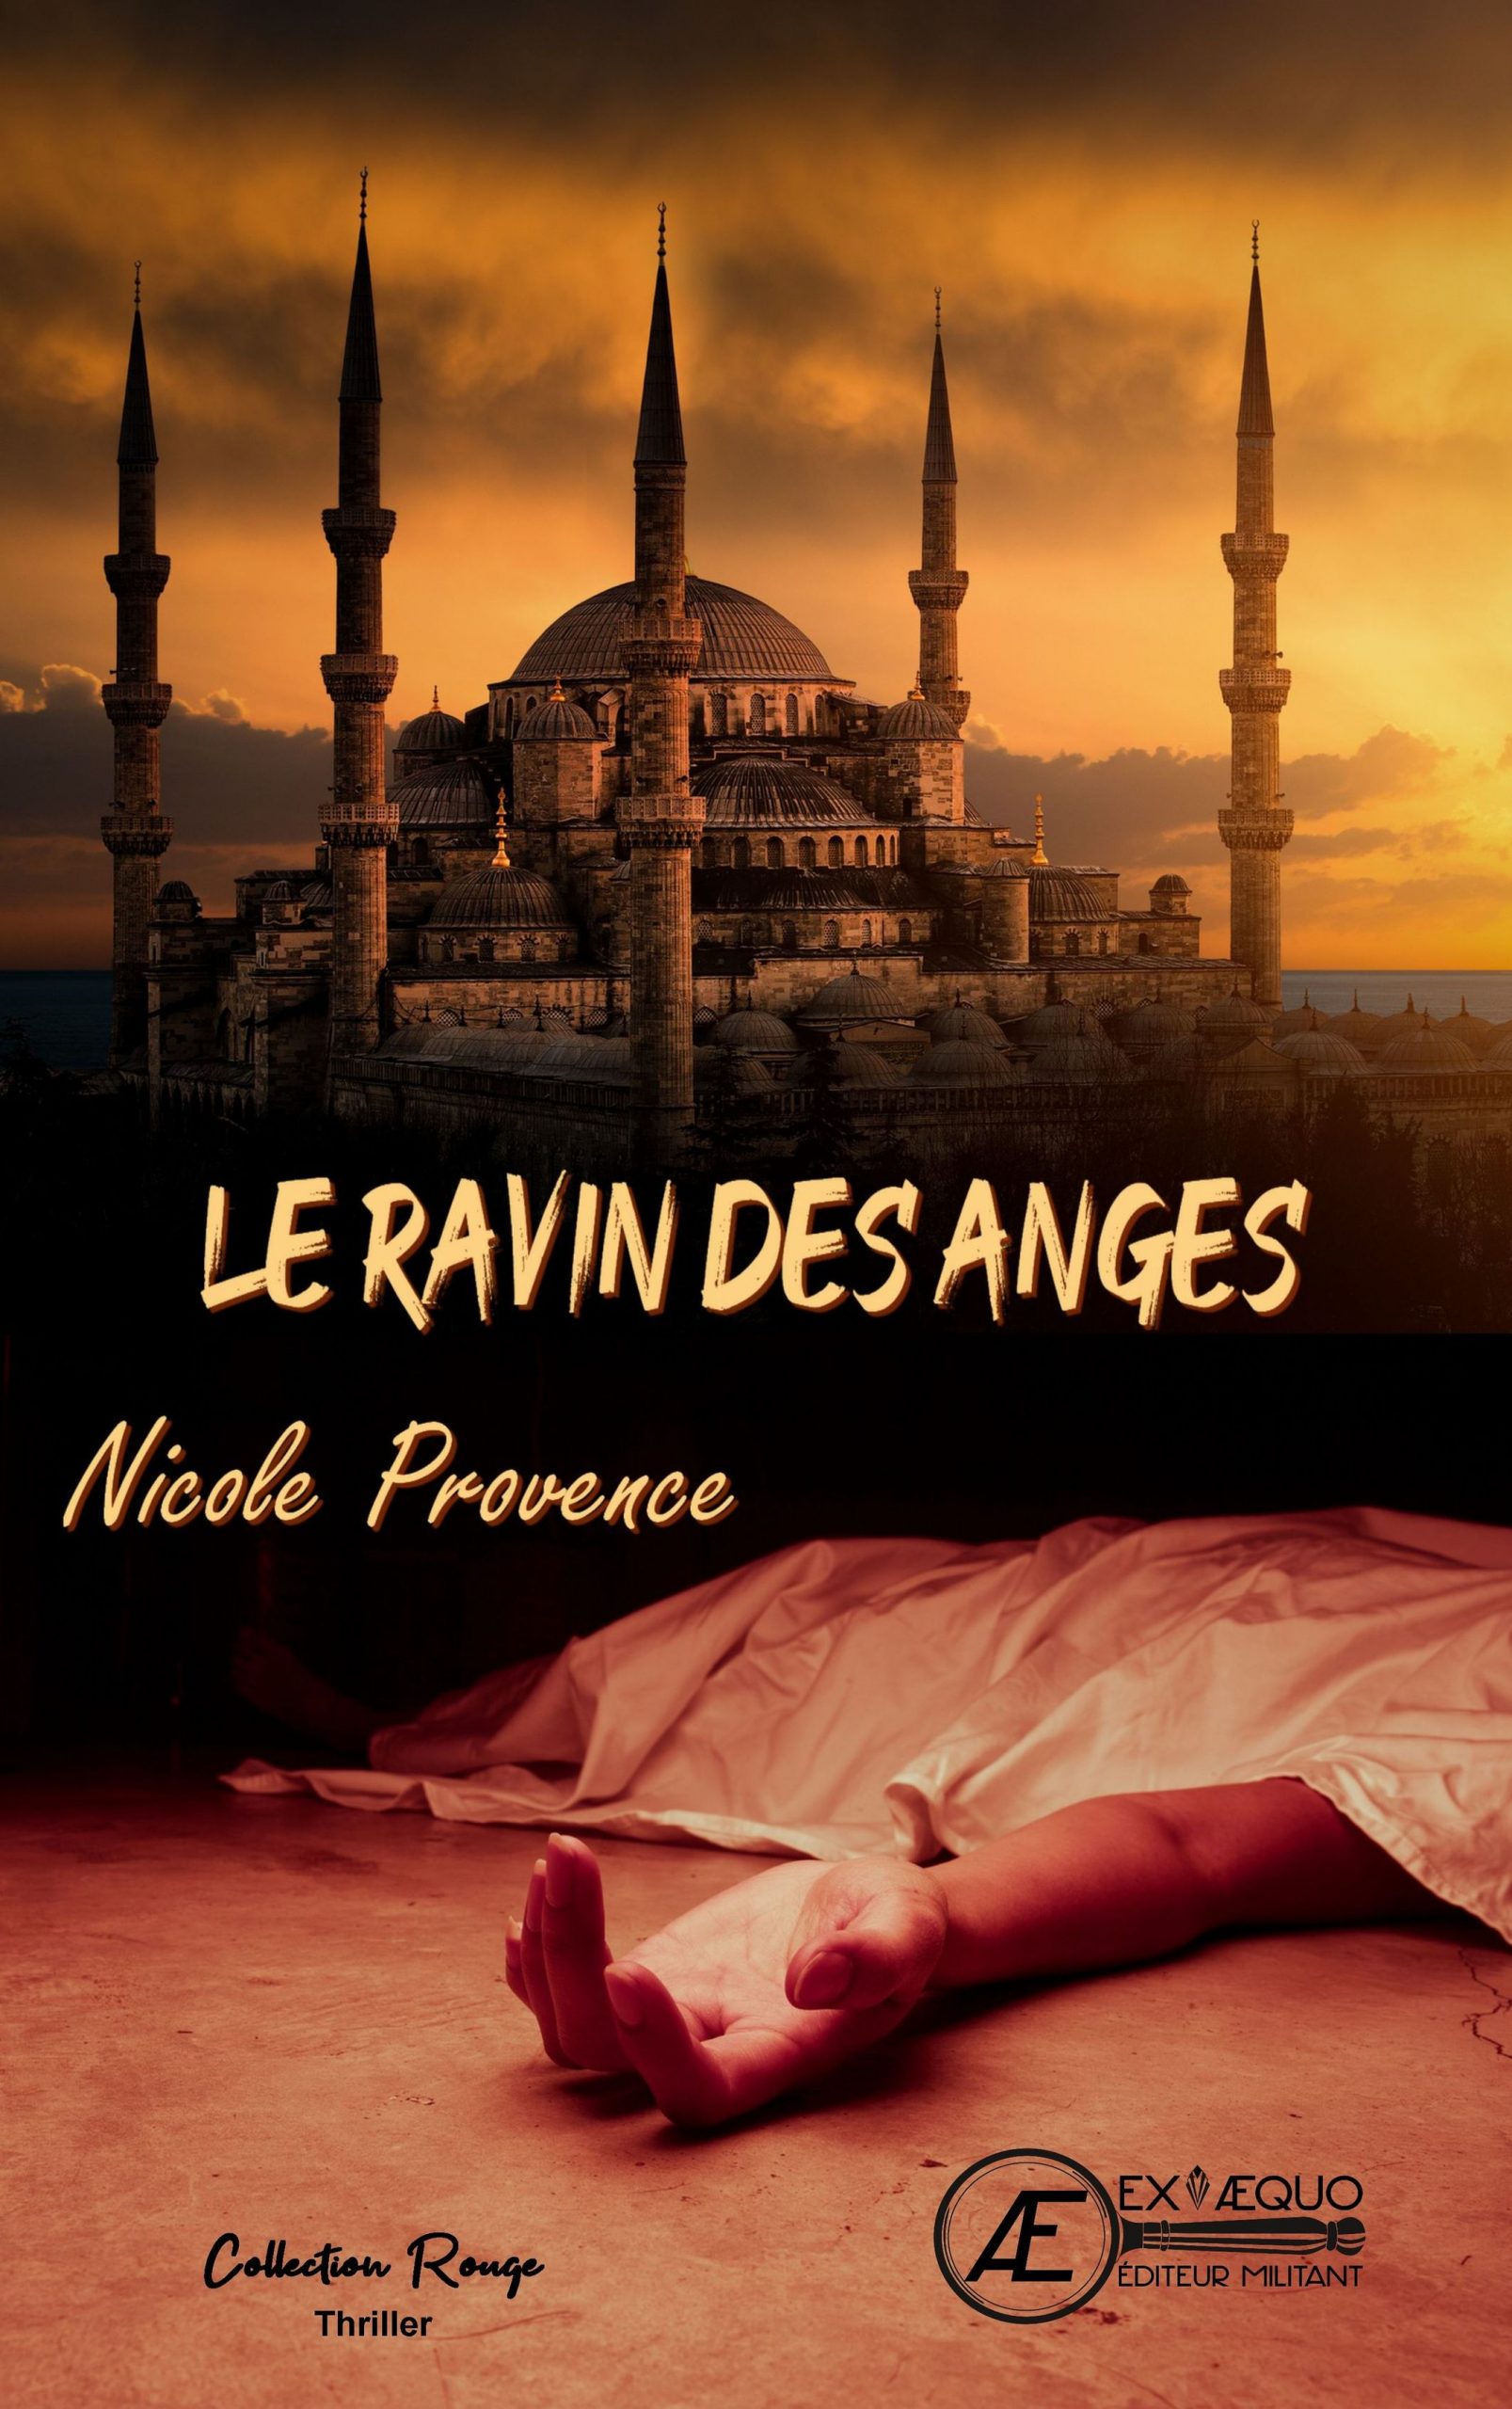 You are currently viewing Le ravin des anges, de Nicole Provence